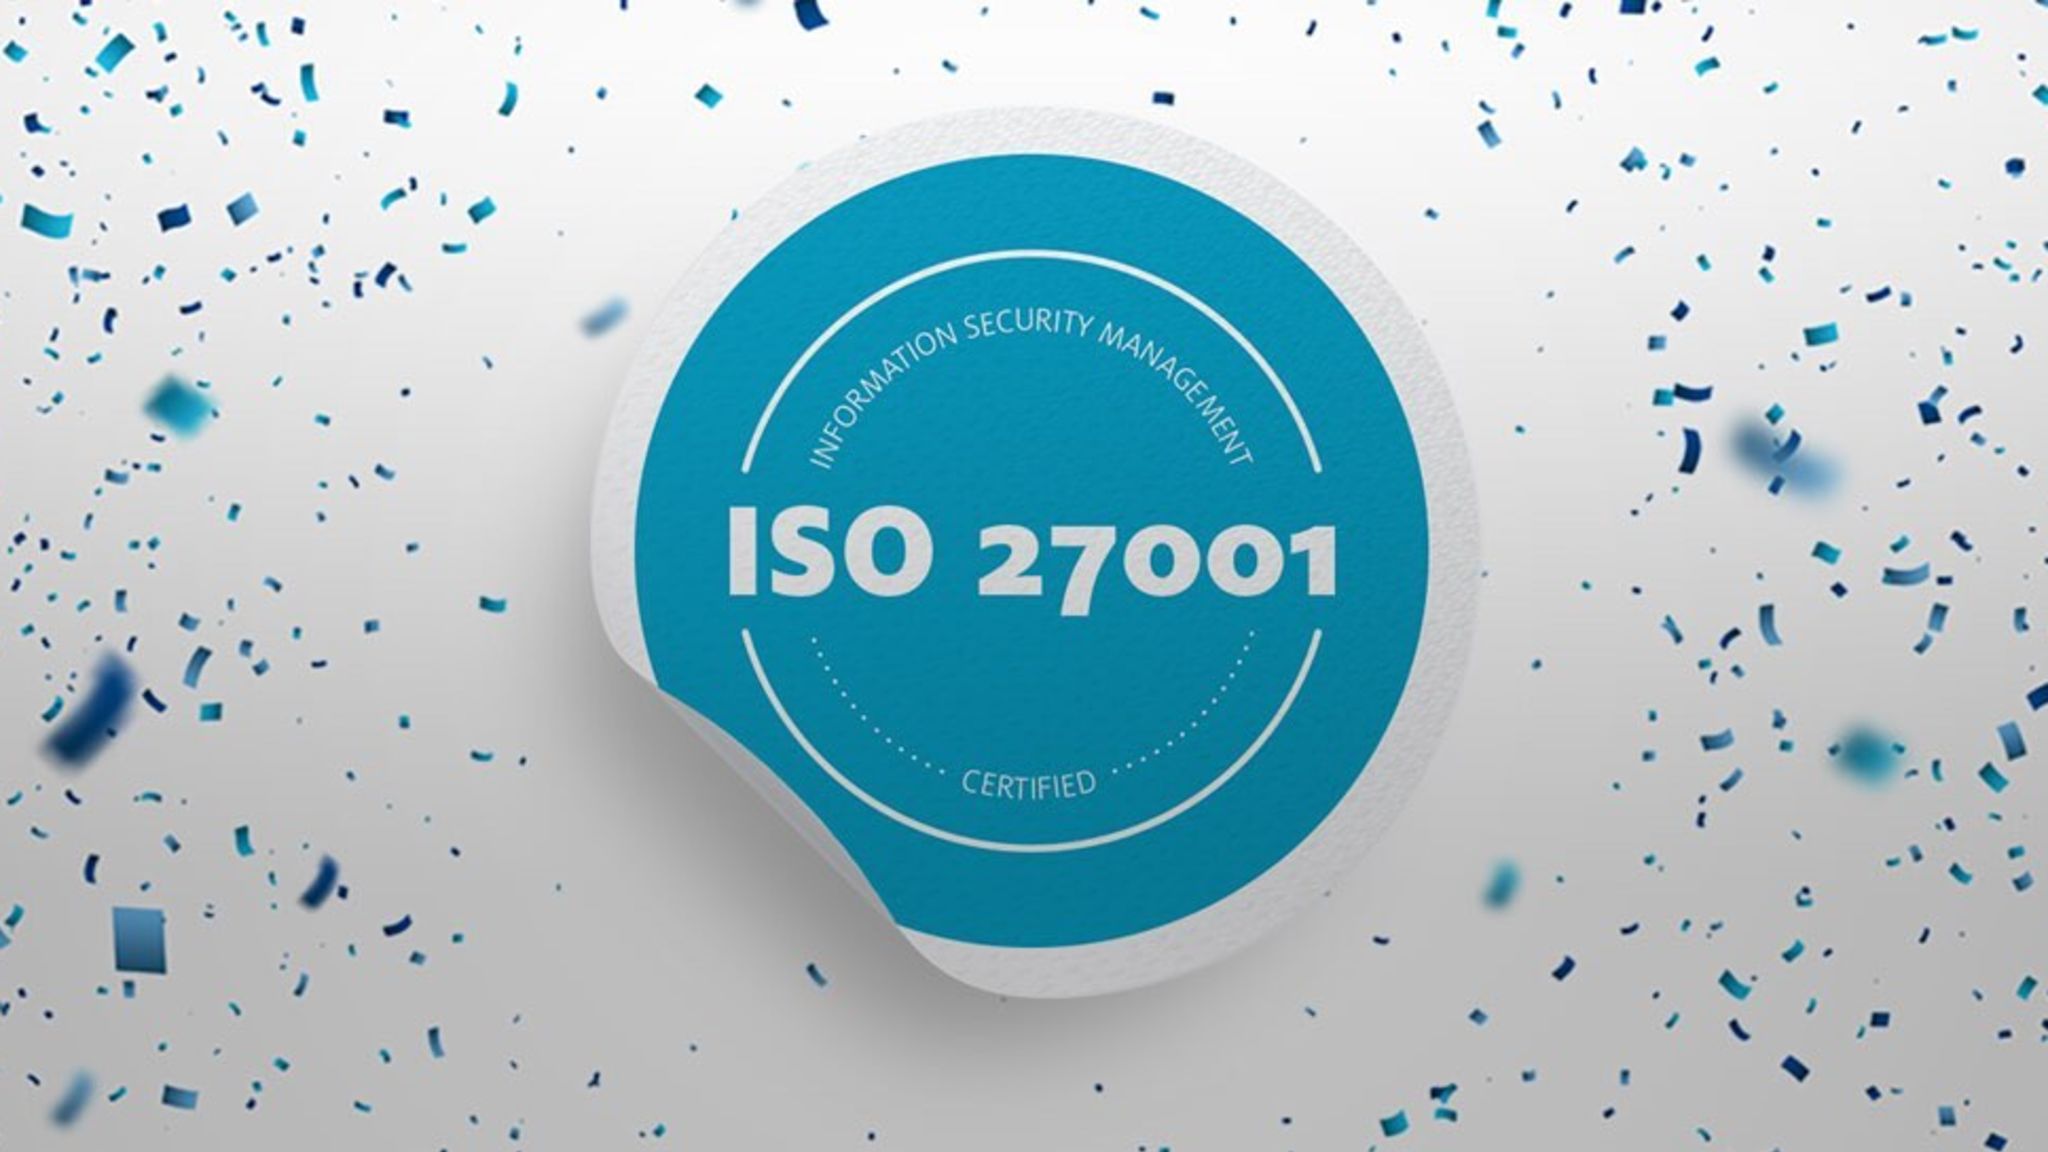 Get ISO 27001 Certification To Reach Your Business Targets